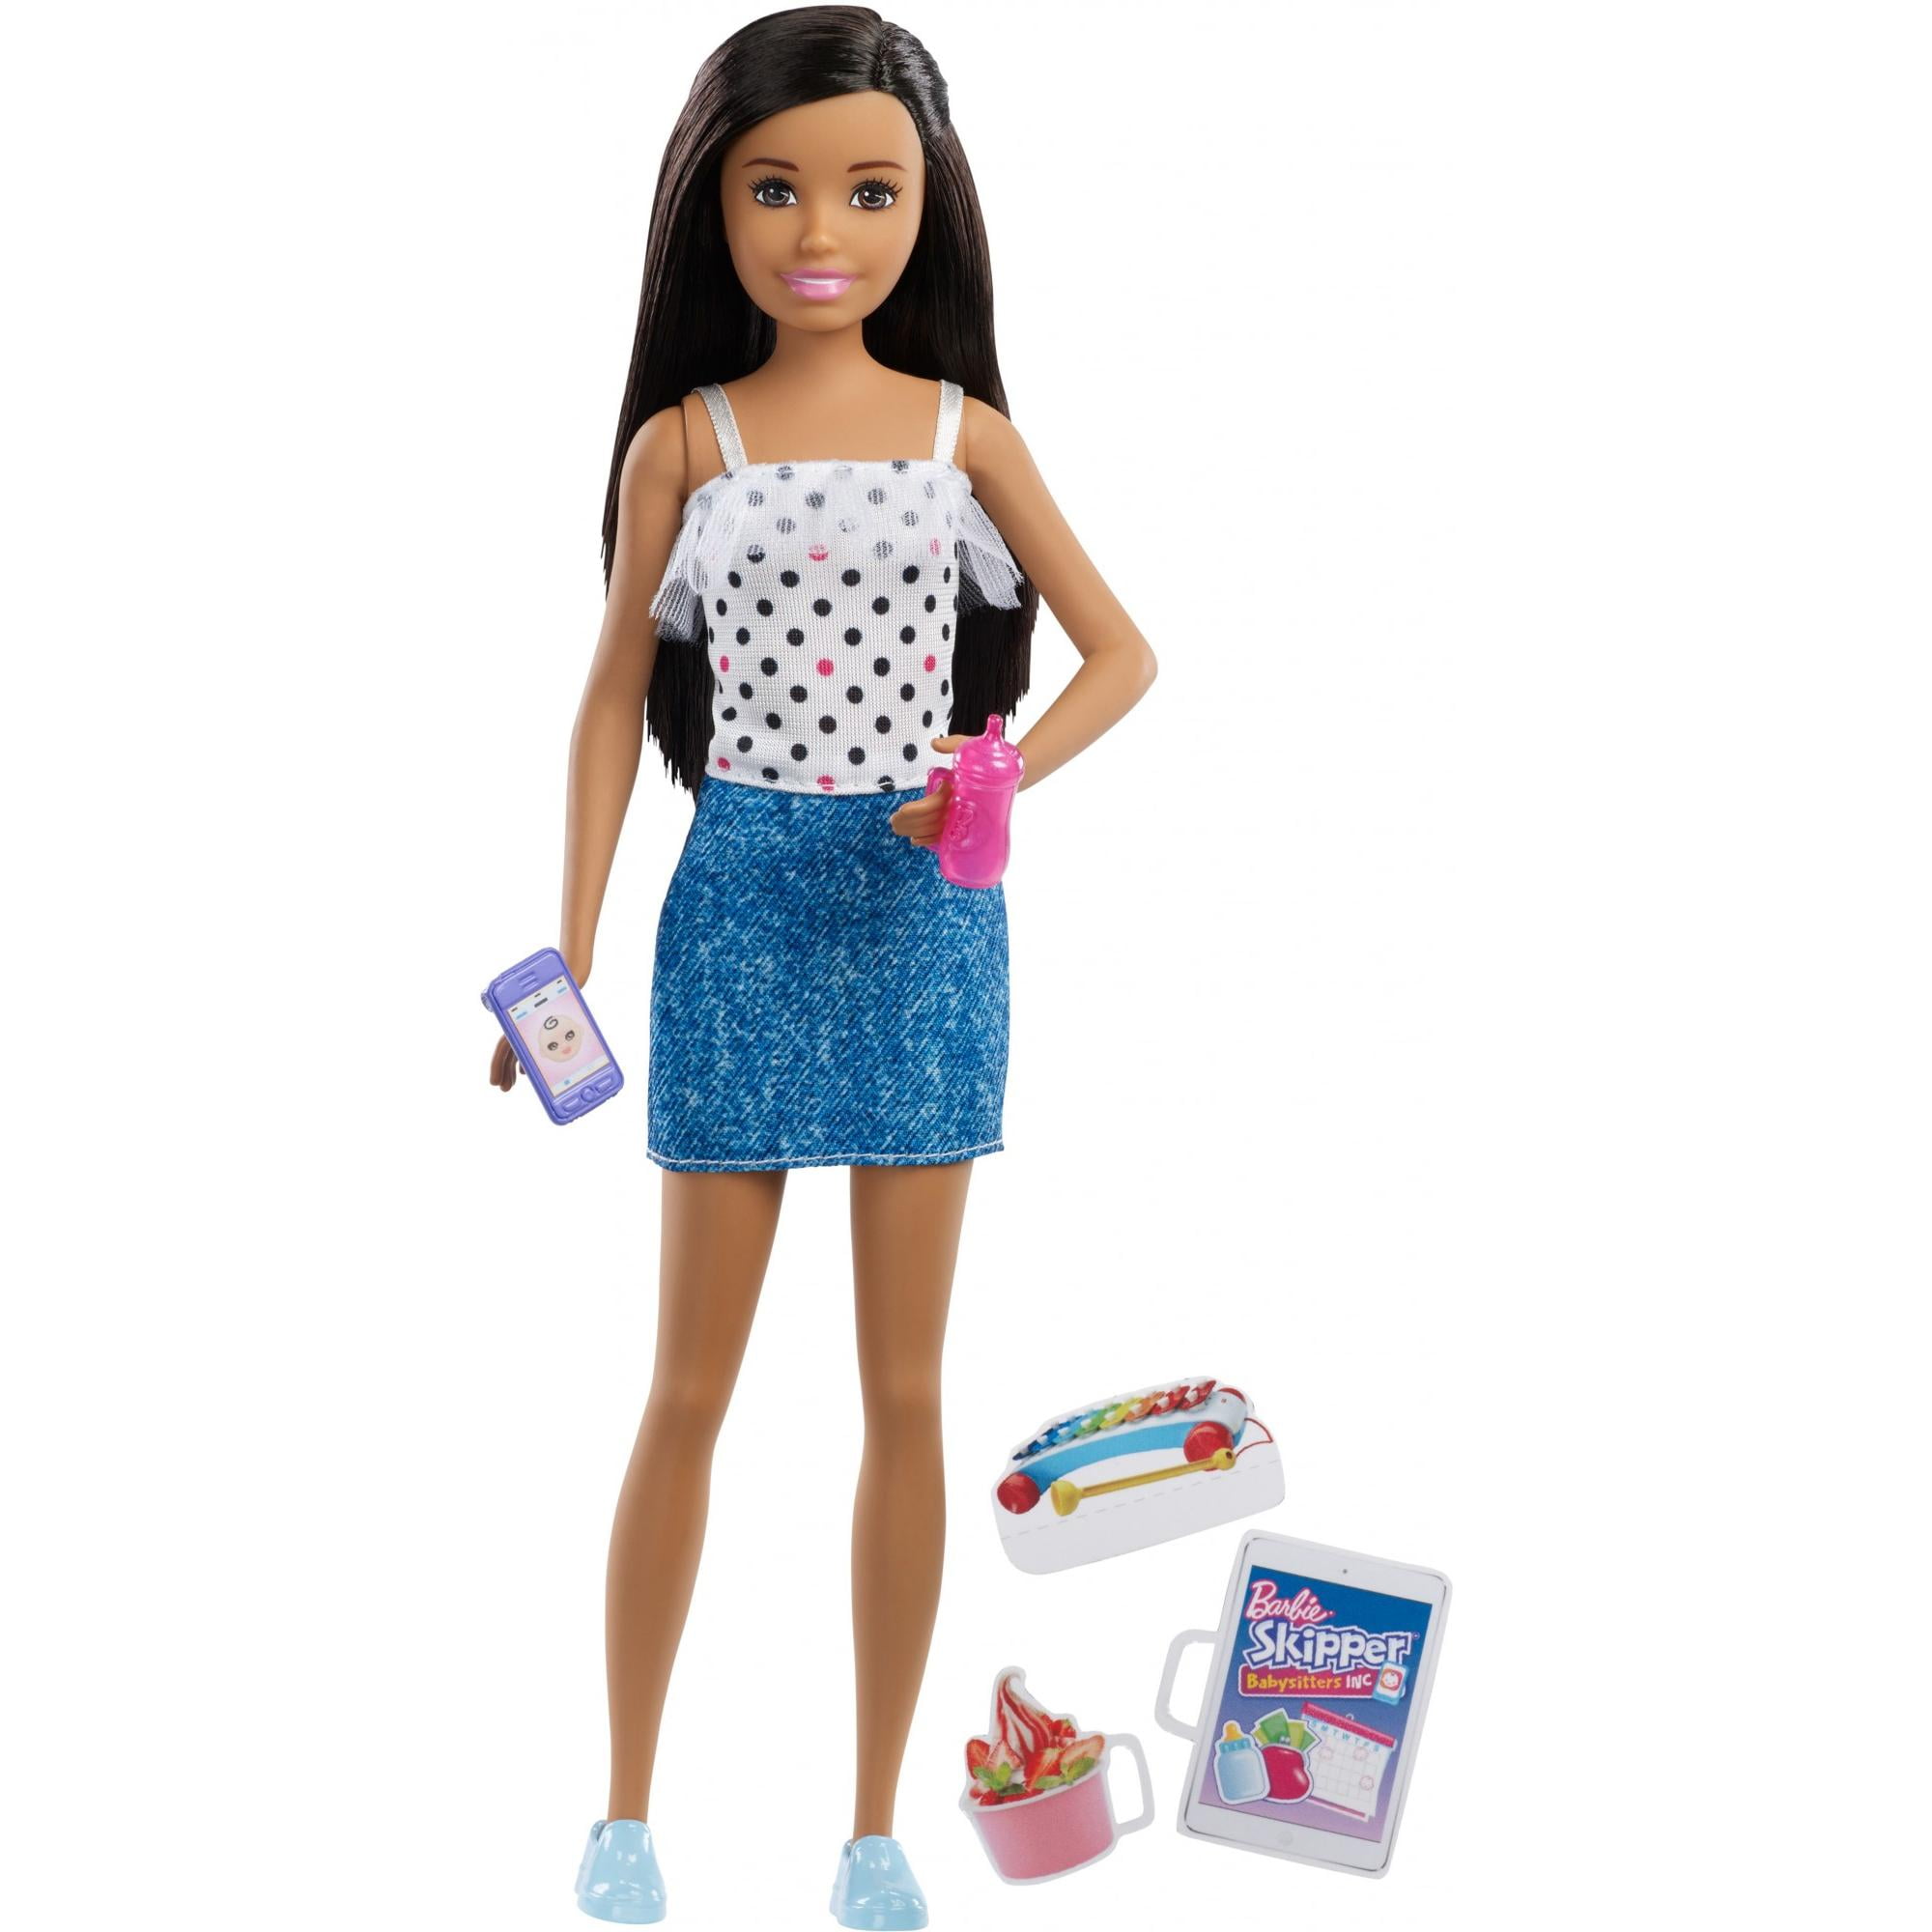 NEW Barbie Skipper Babysitter Doll Blue Pink Donut Top Clothing Also Fits Barbie 